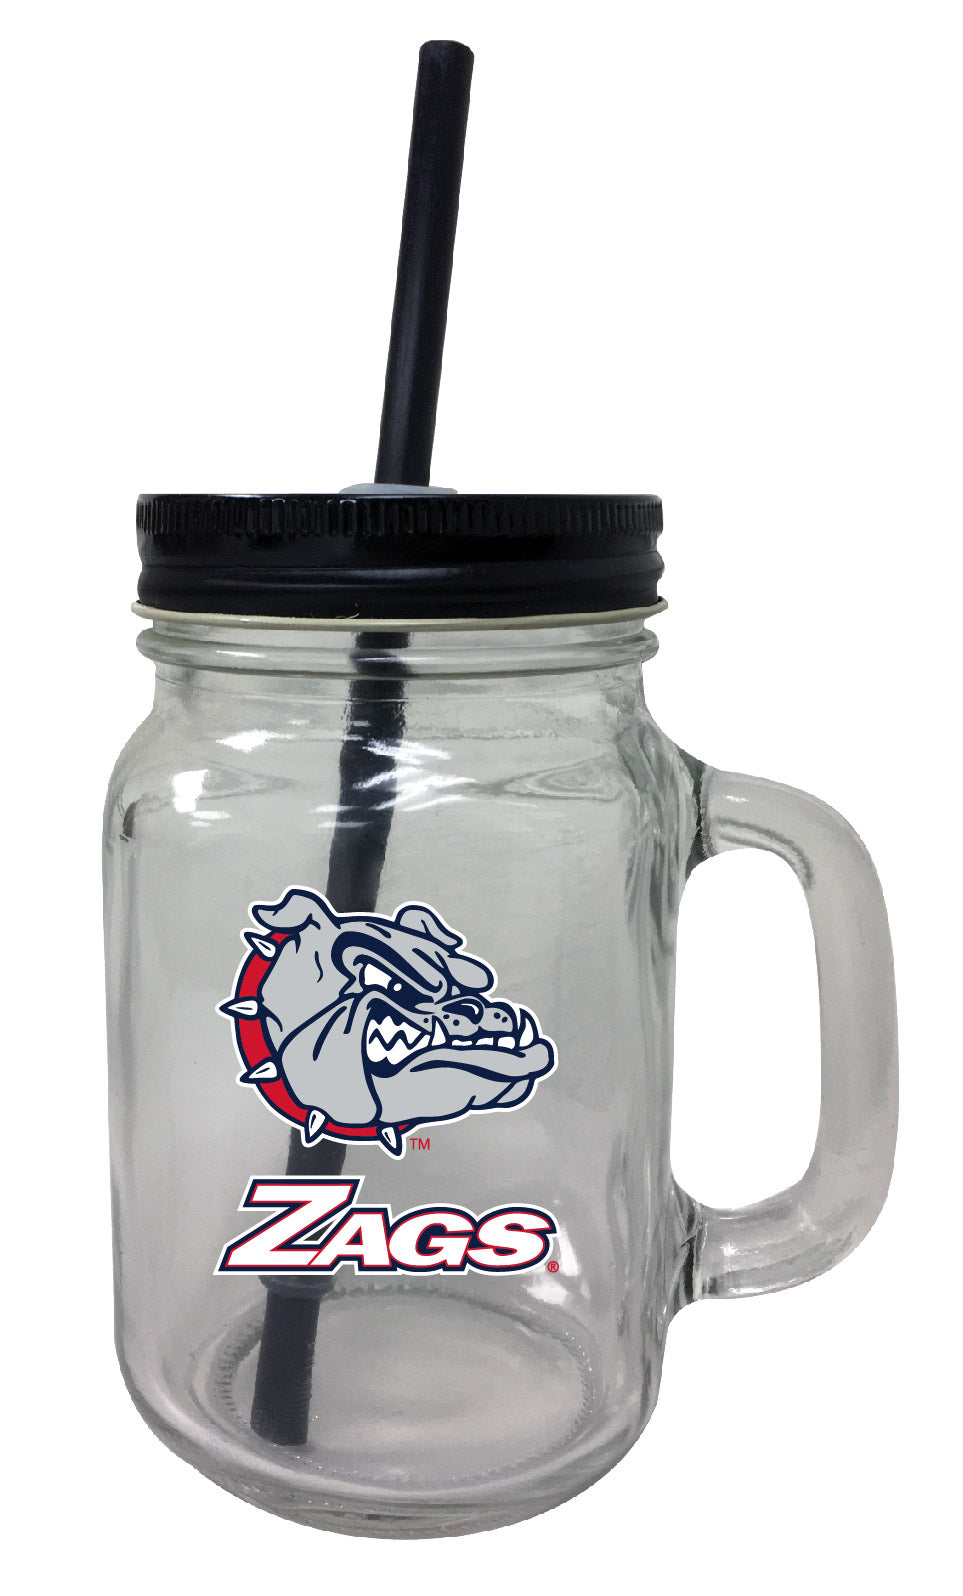 Gonzaga Bulldogs NCAA Iconic Mason Jar Glass - Officially Licensed Collegiate Drinkware with Lid and Straw 2-Pack